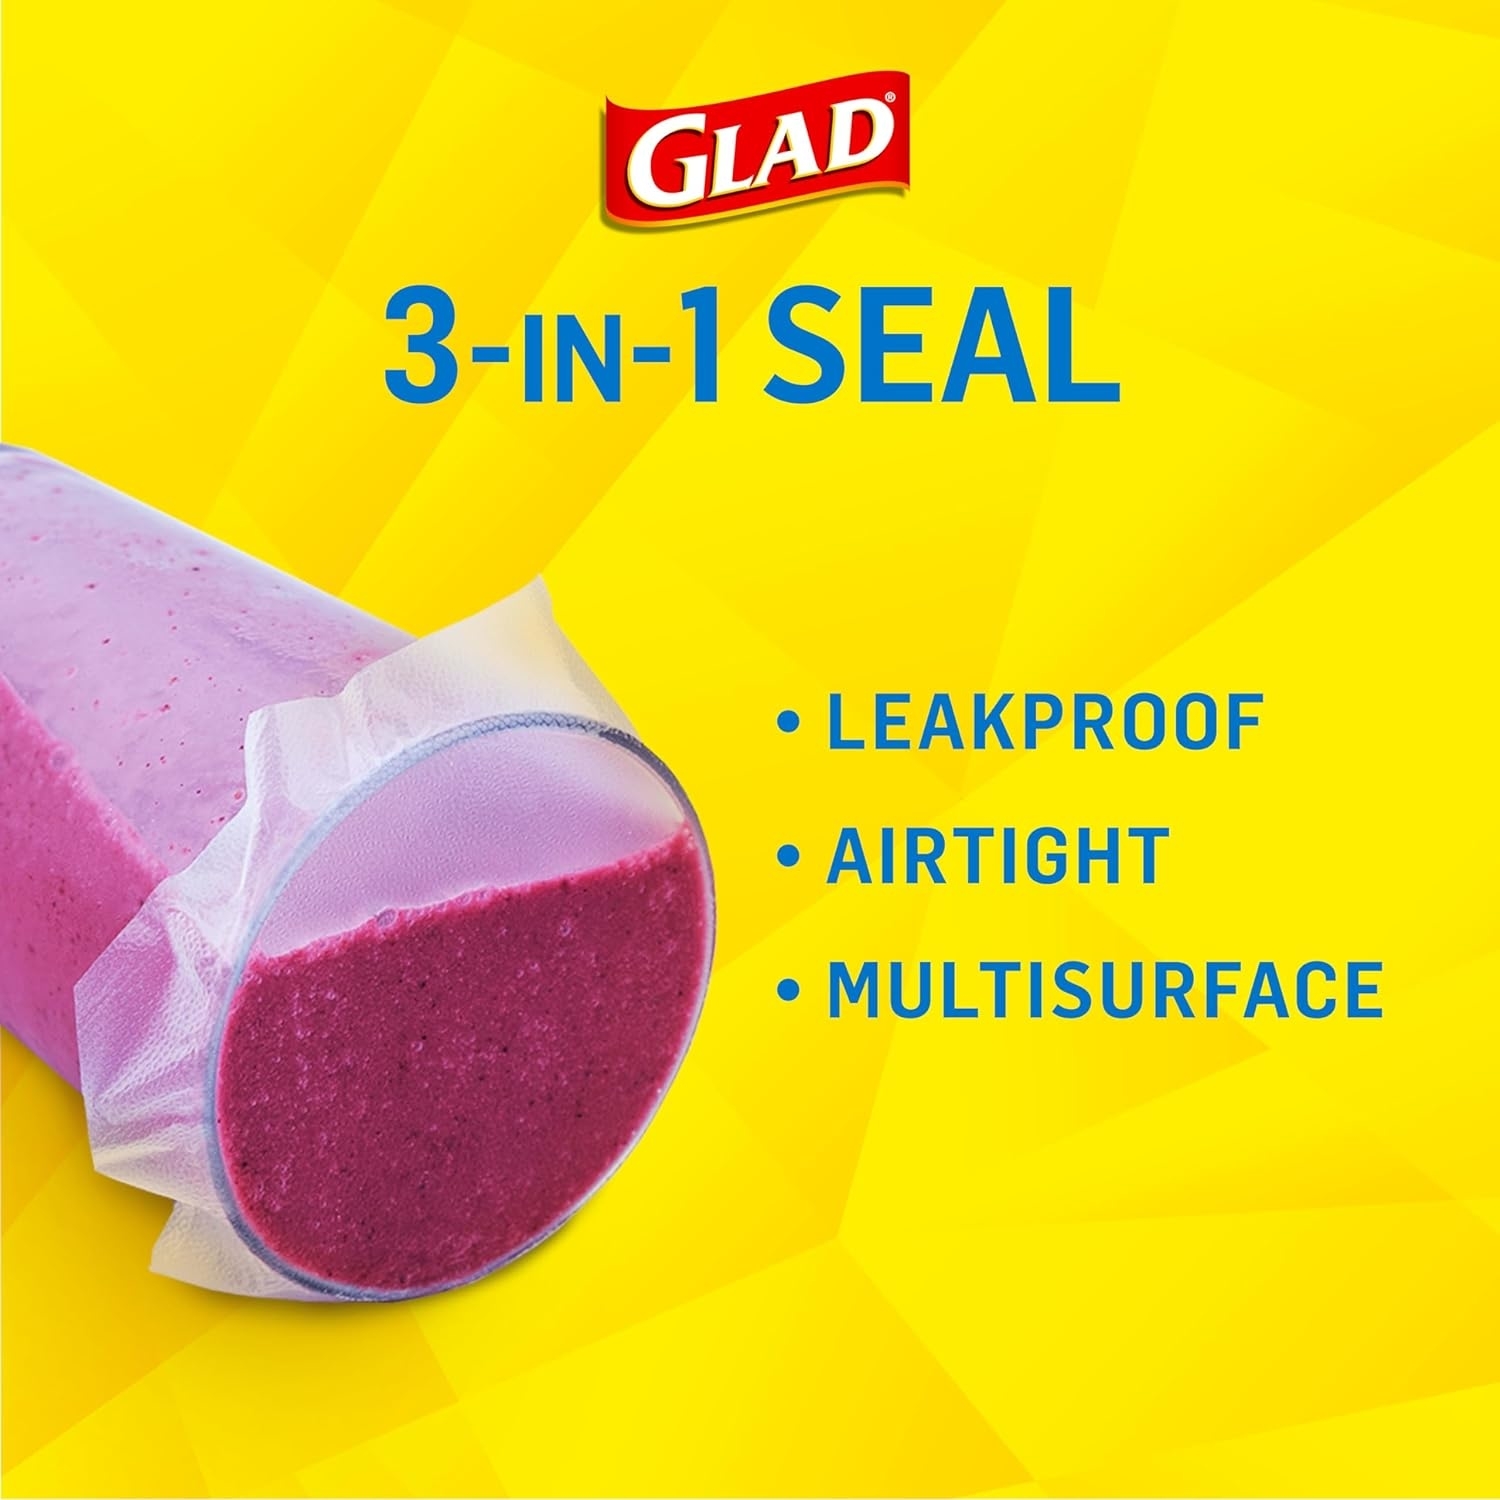 glad graphic showing the leakproof seal on their cling wrap